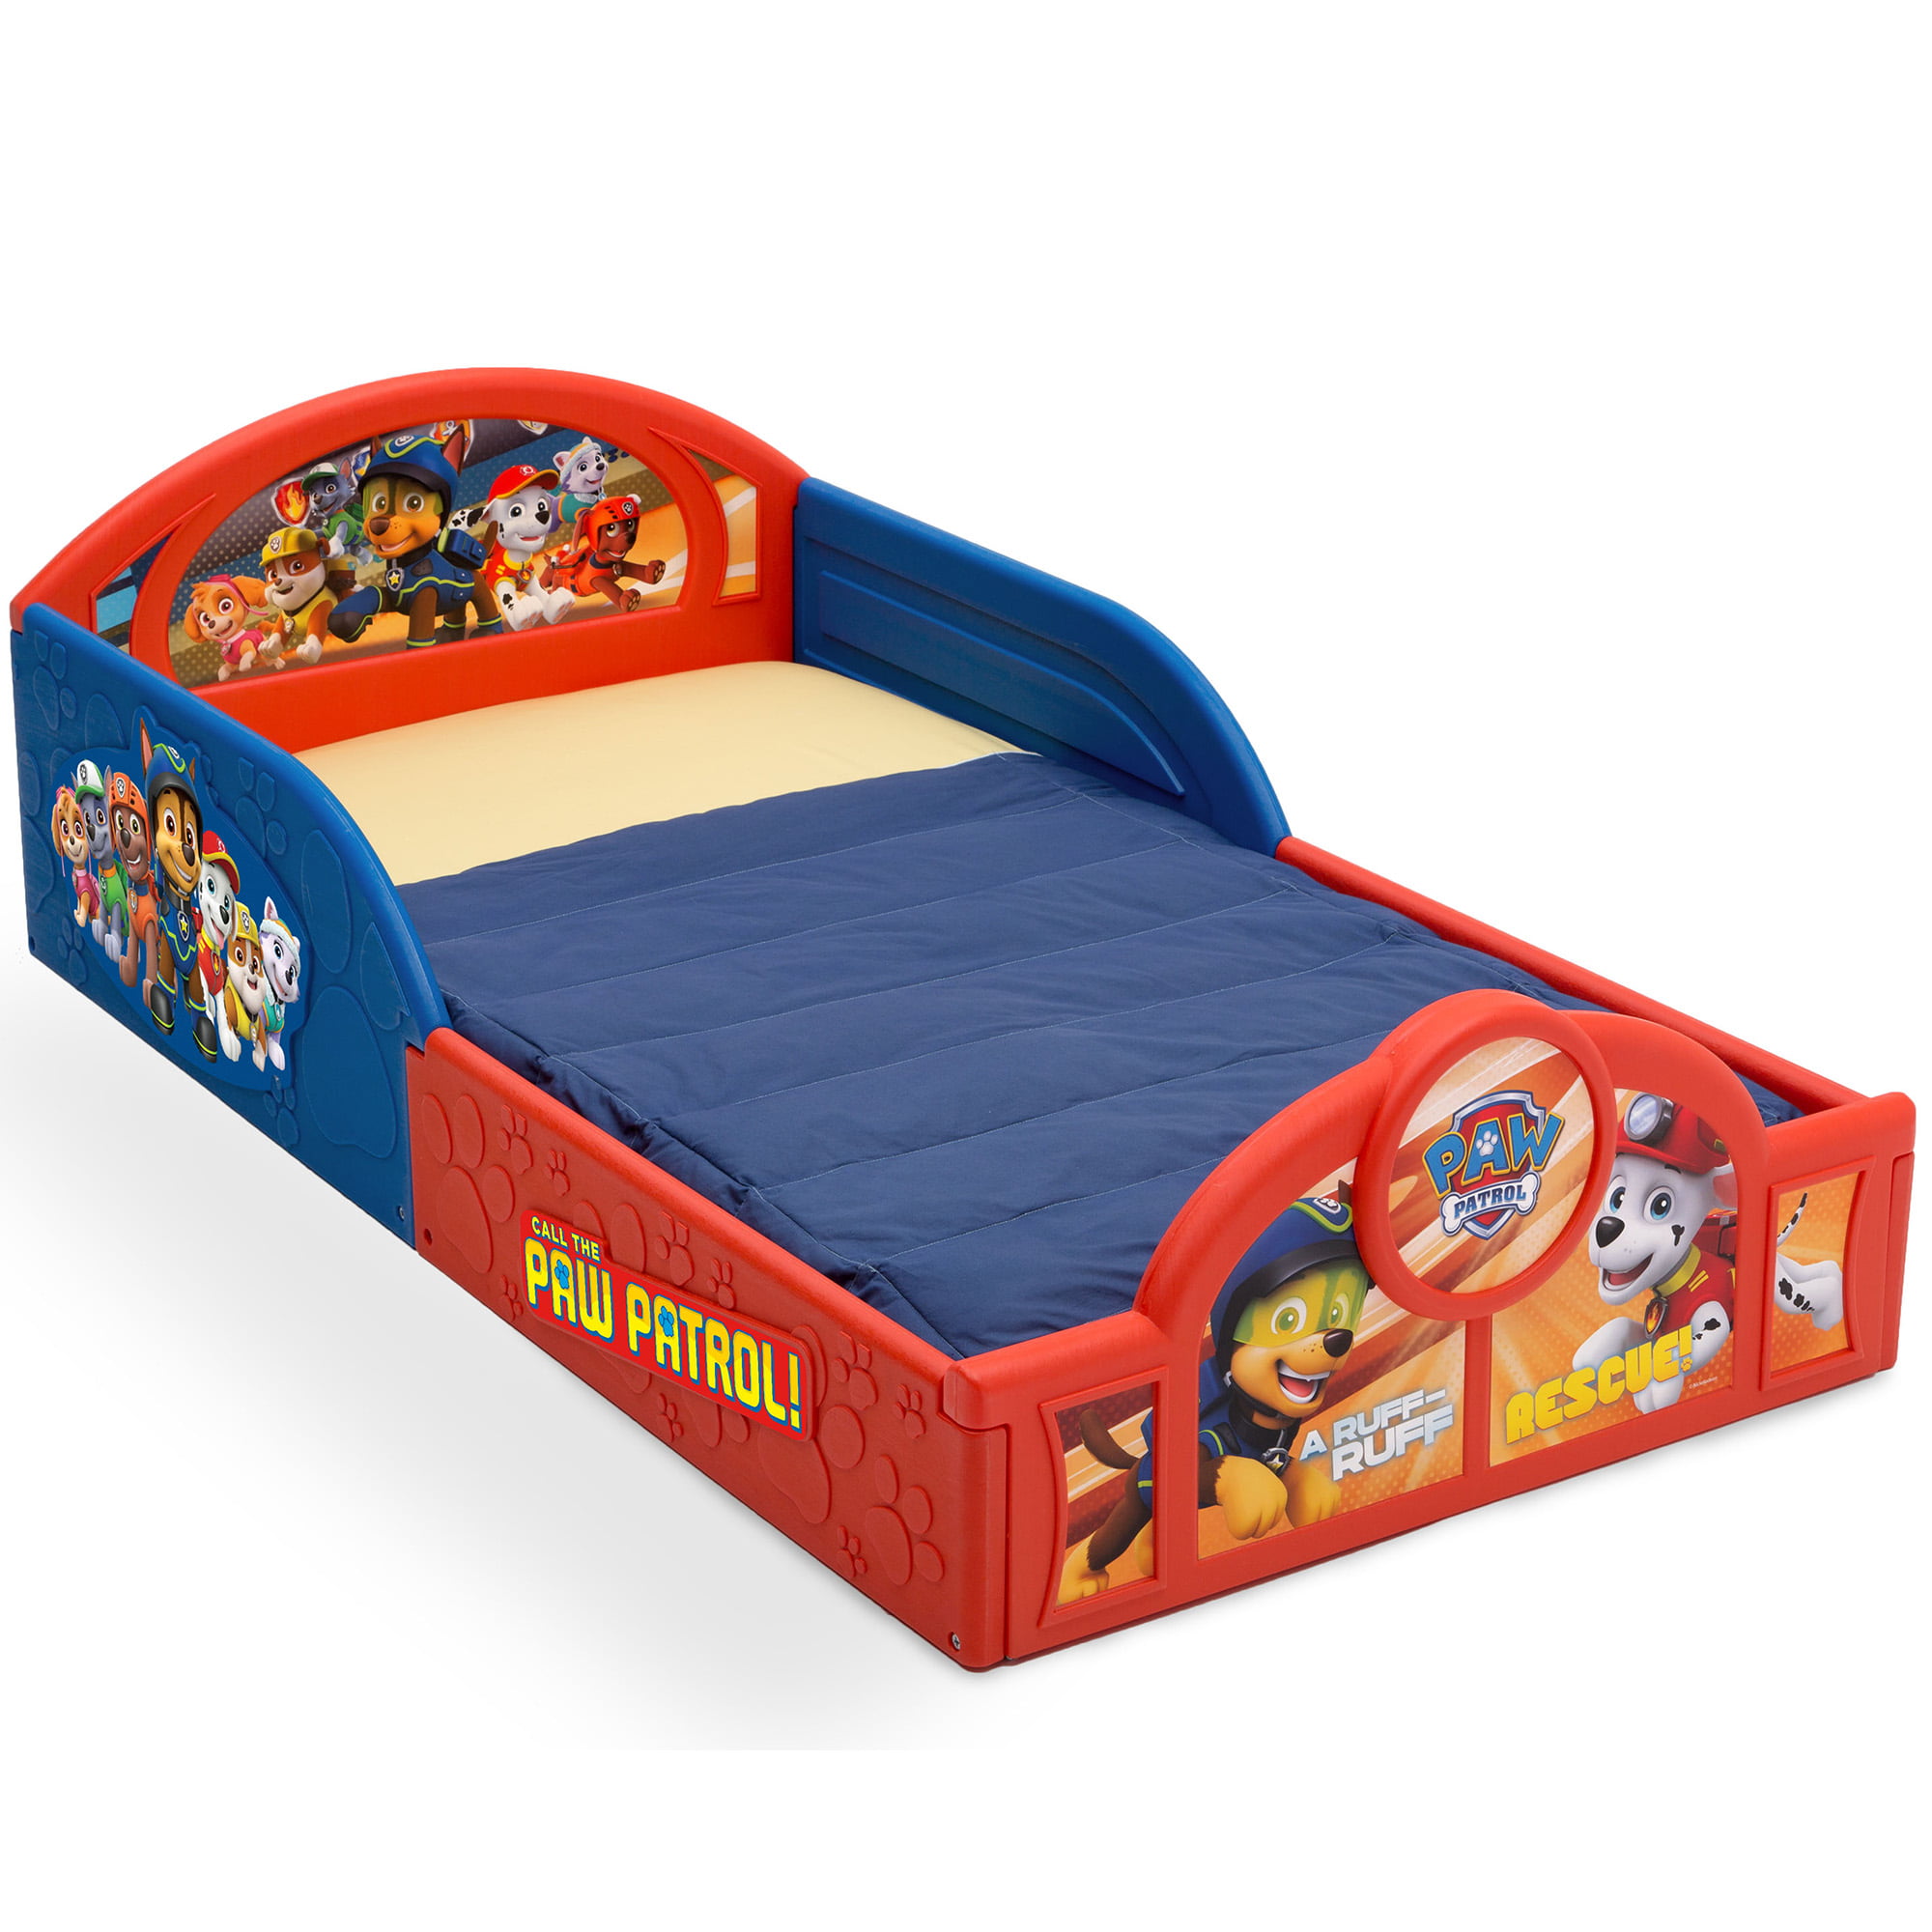 PAW Patrol Toddler Bed with High Side Rails Kids Strong Wood Furniture Nick Jr.